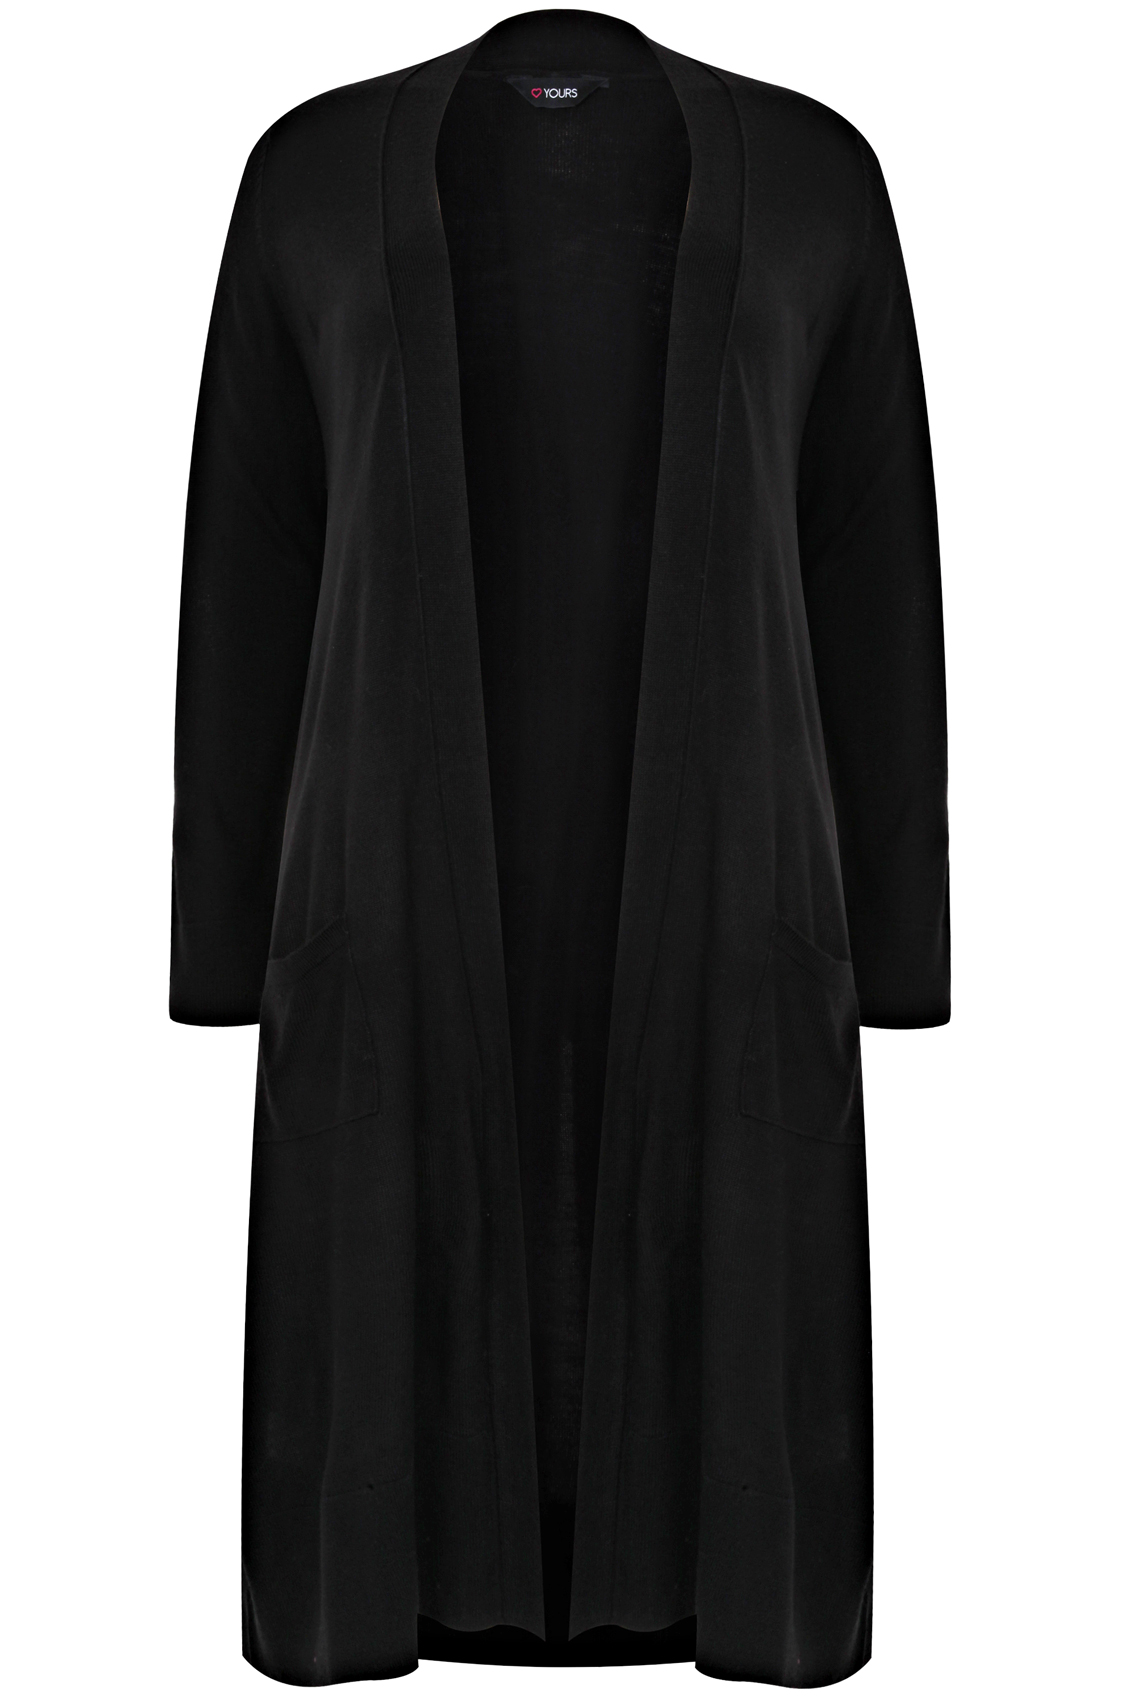 Black Maxi Knit Cardigan With Pockets Plus Size 16 to 36